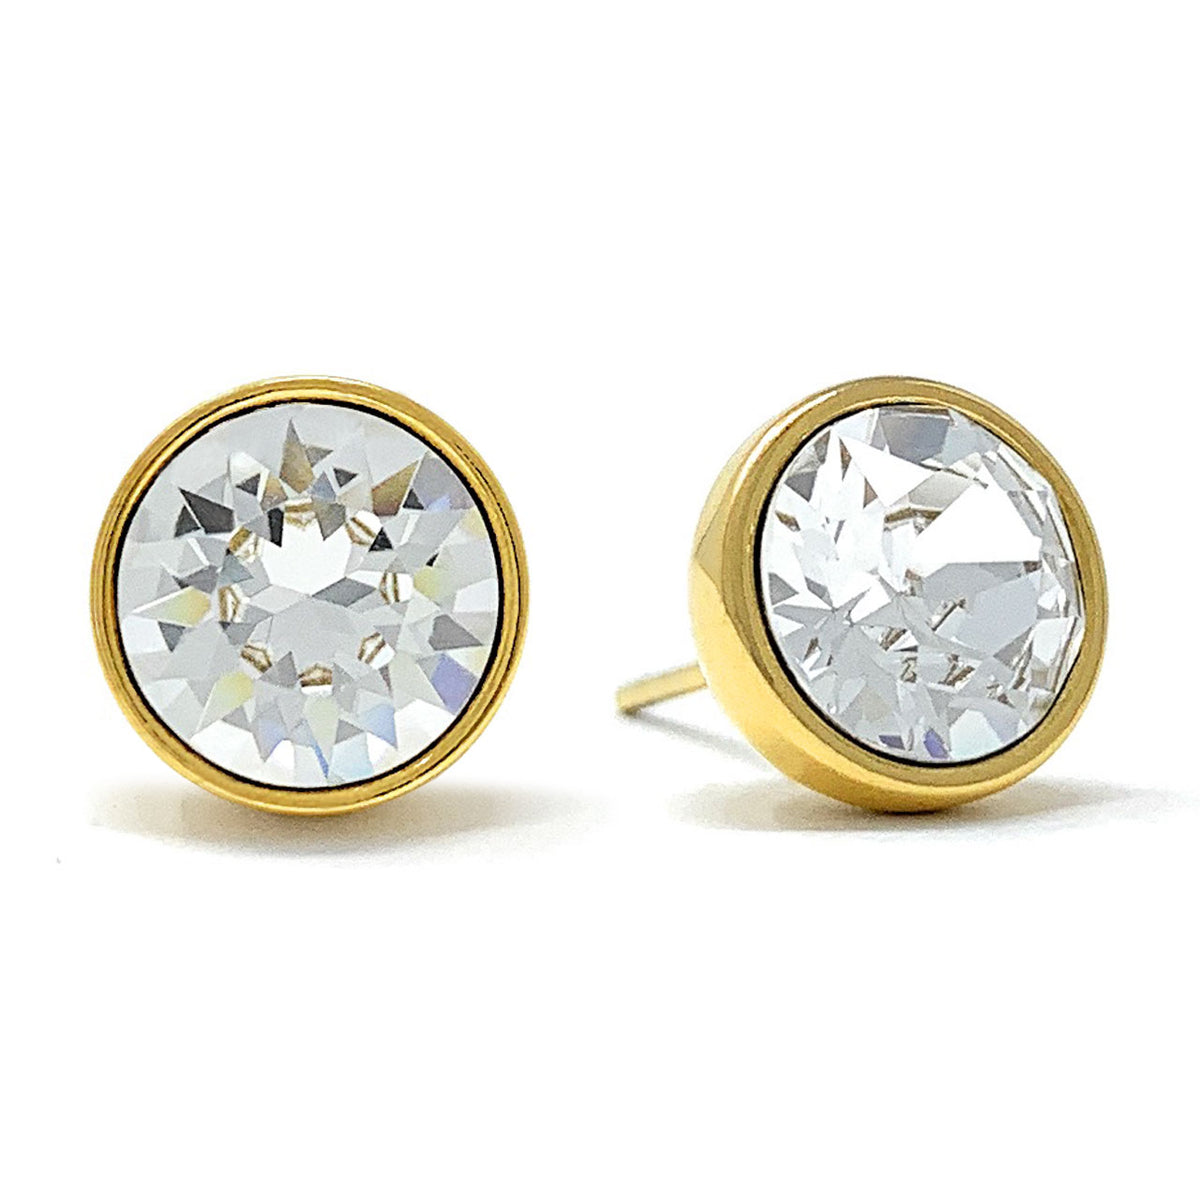 Harley Stud Earrings with White Clear Round Crystals from Swarovski Gold Plated - Ed Heart